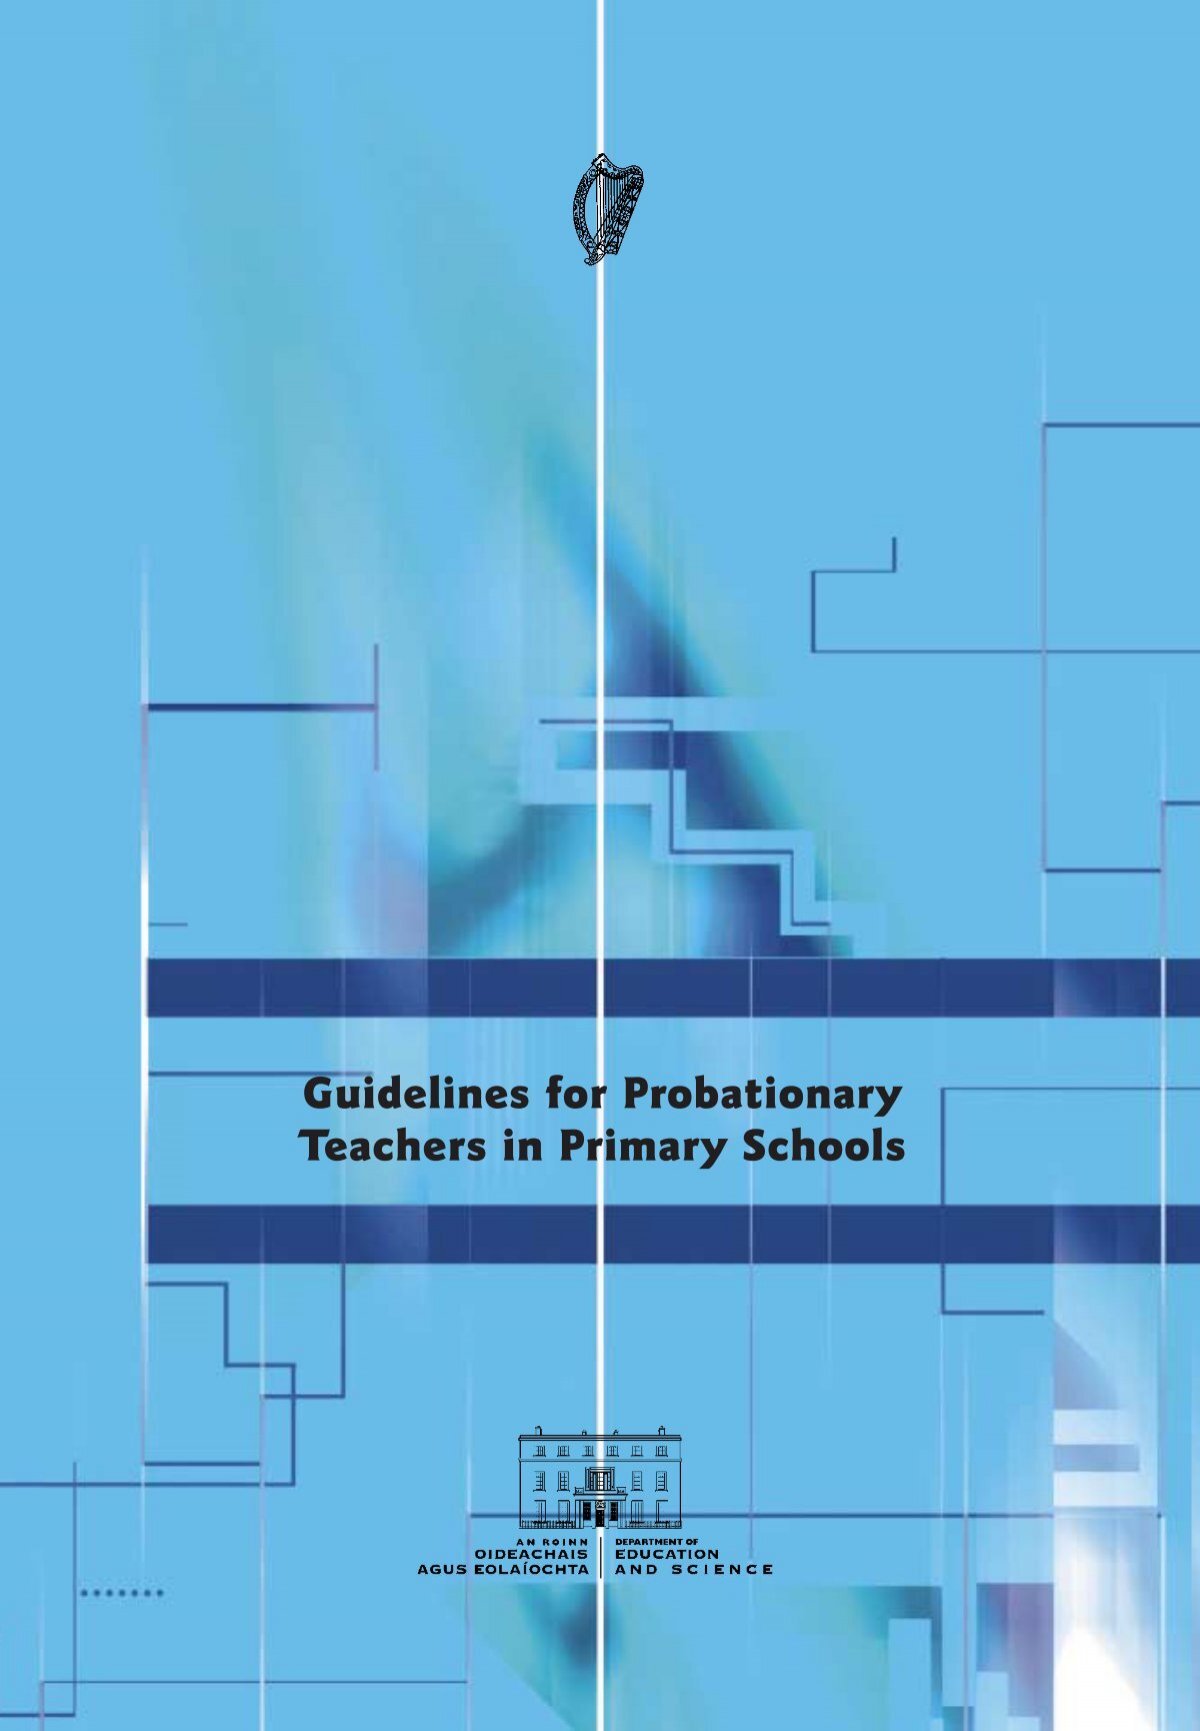 guidelines-for-probationary-teachers-in-primary-schools-national